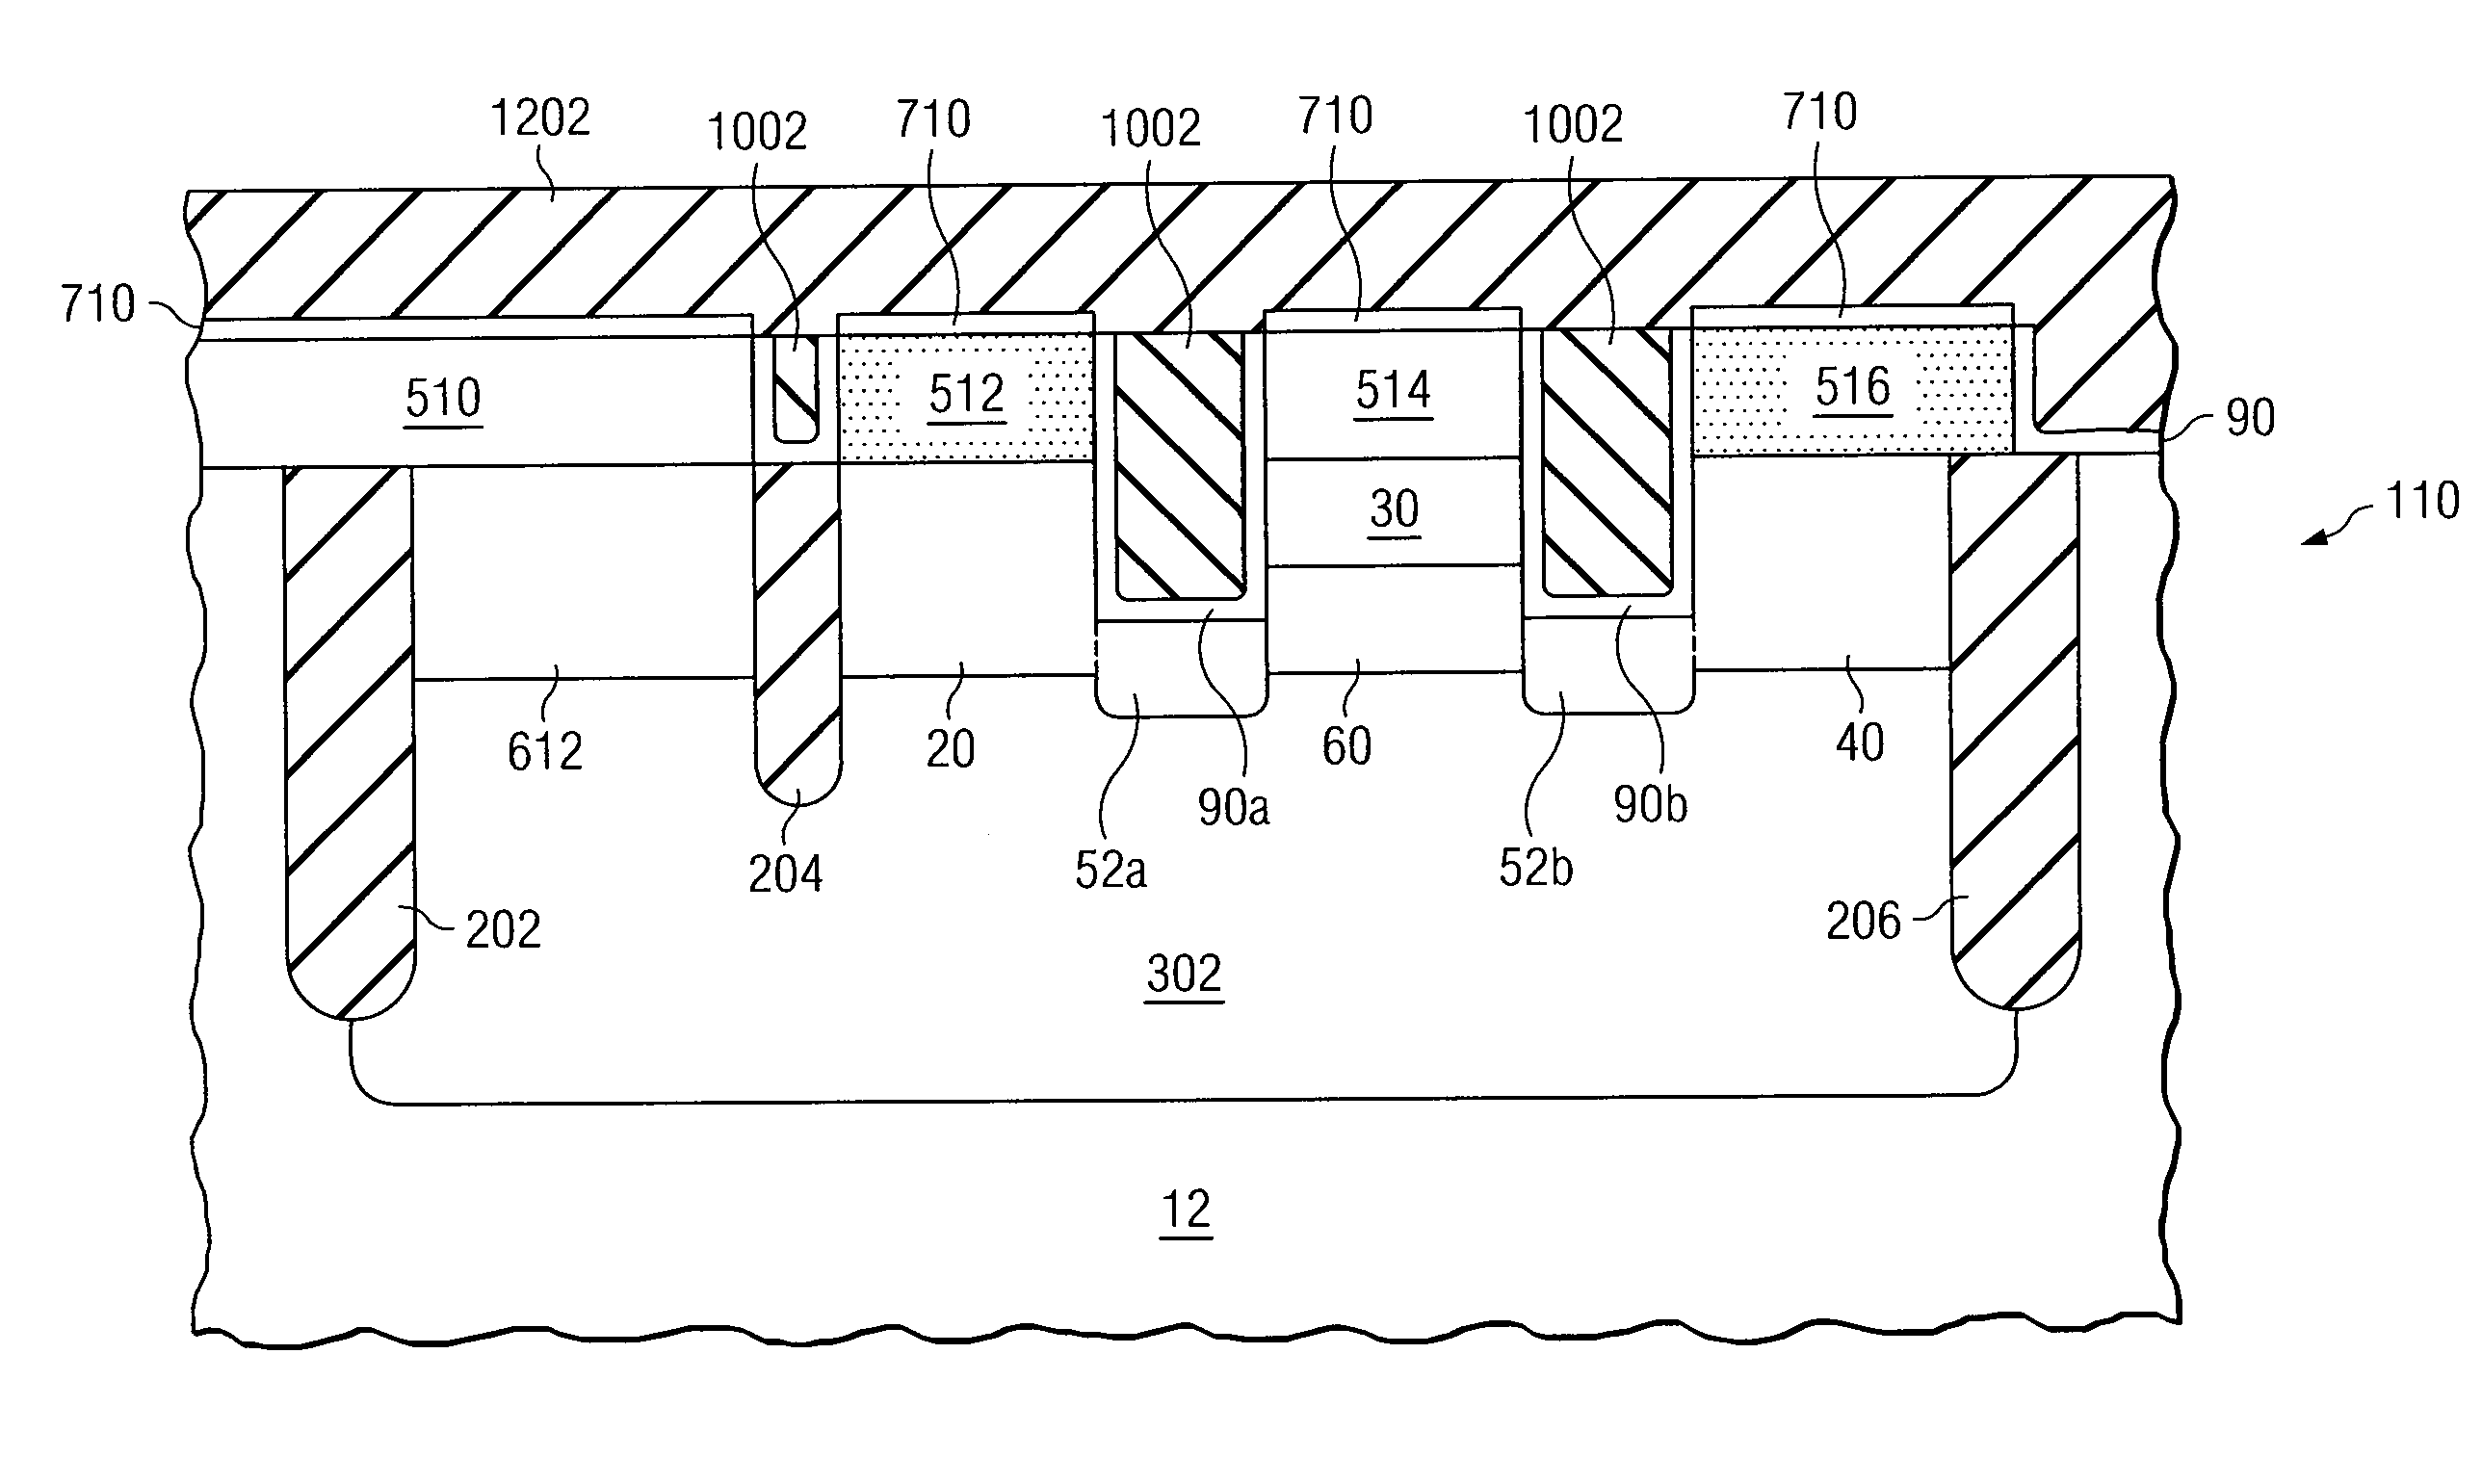 Method for applying a stress layer to a semiconductor device and device formed therefrom